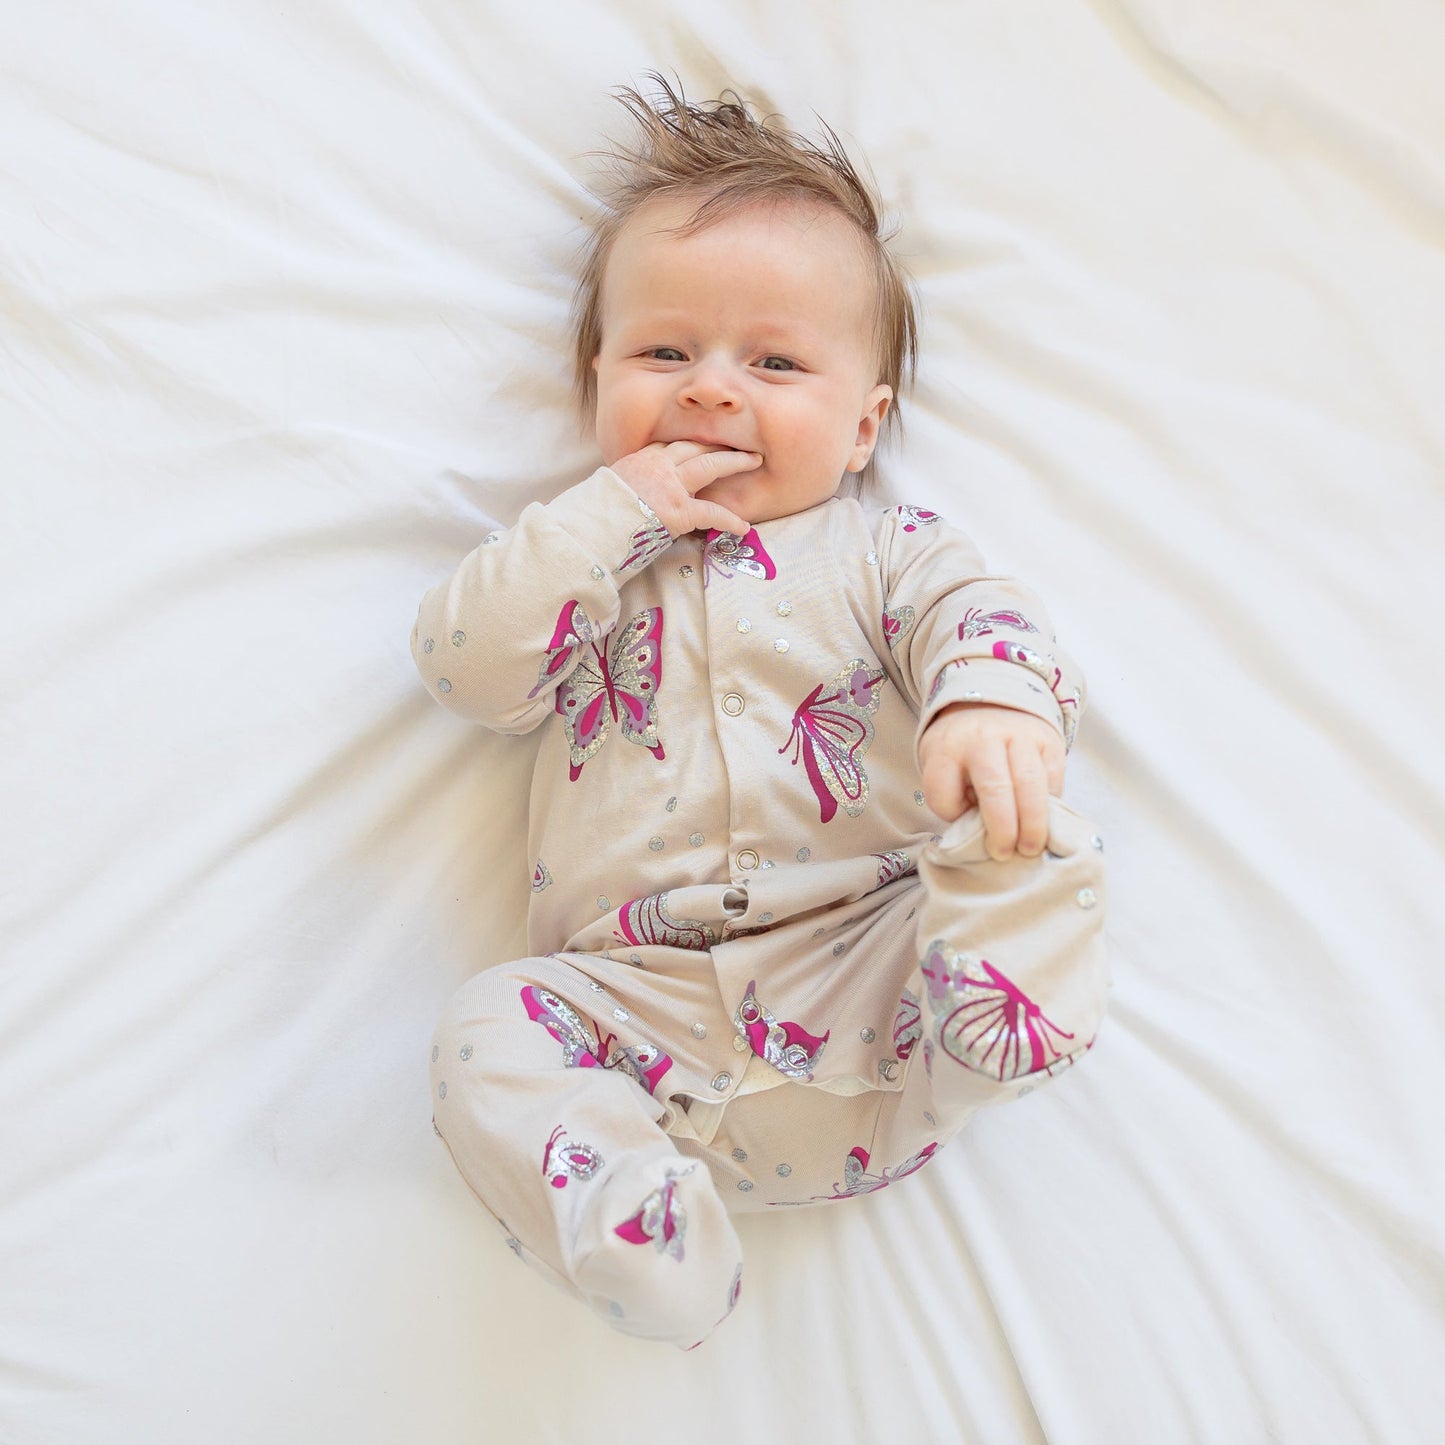 Load image into Gallery viewer, Foil Butterfly Print Cotton Sleepsuit
